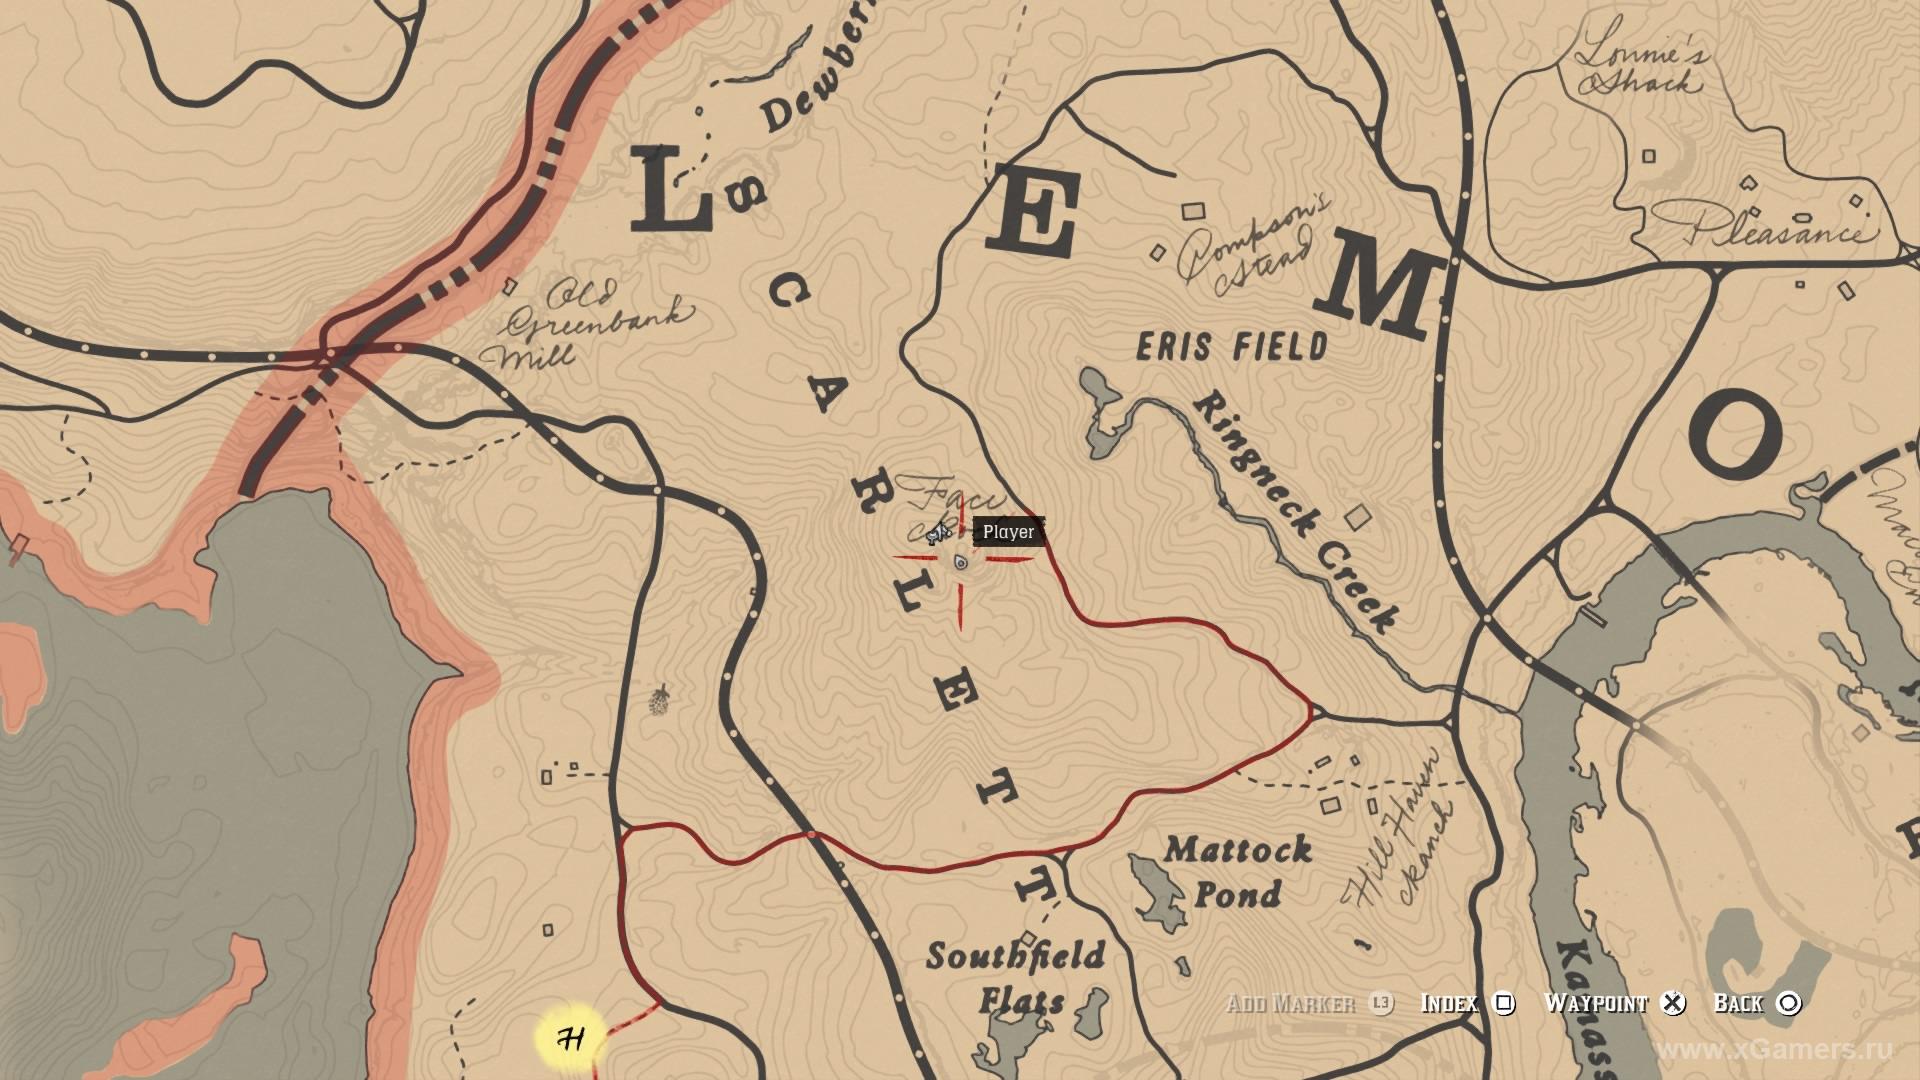 Location of the first treasure map